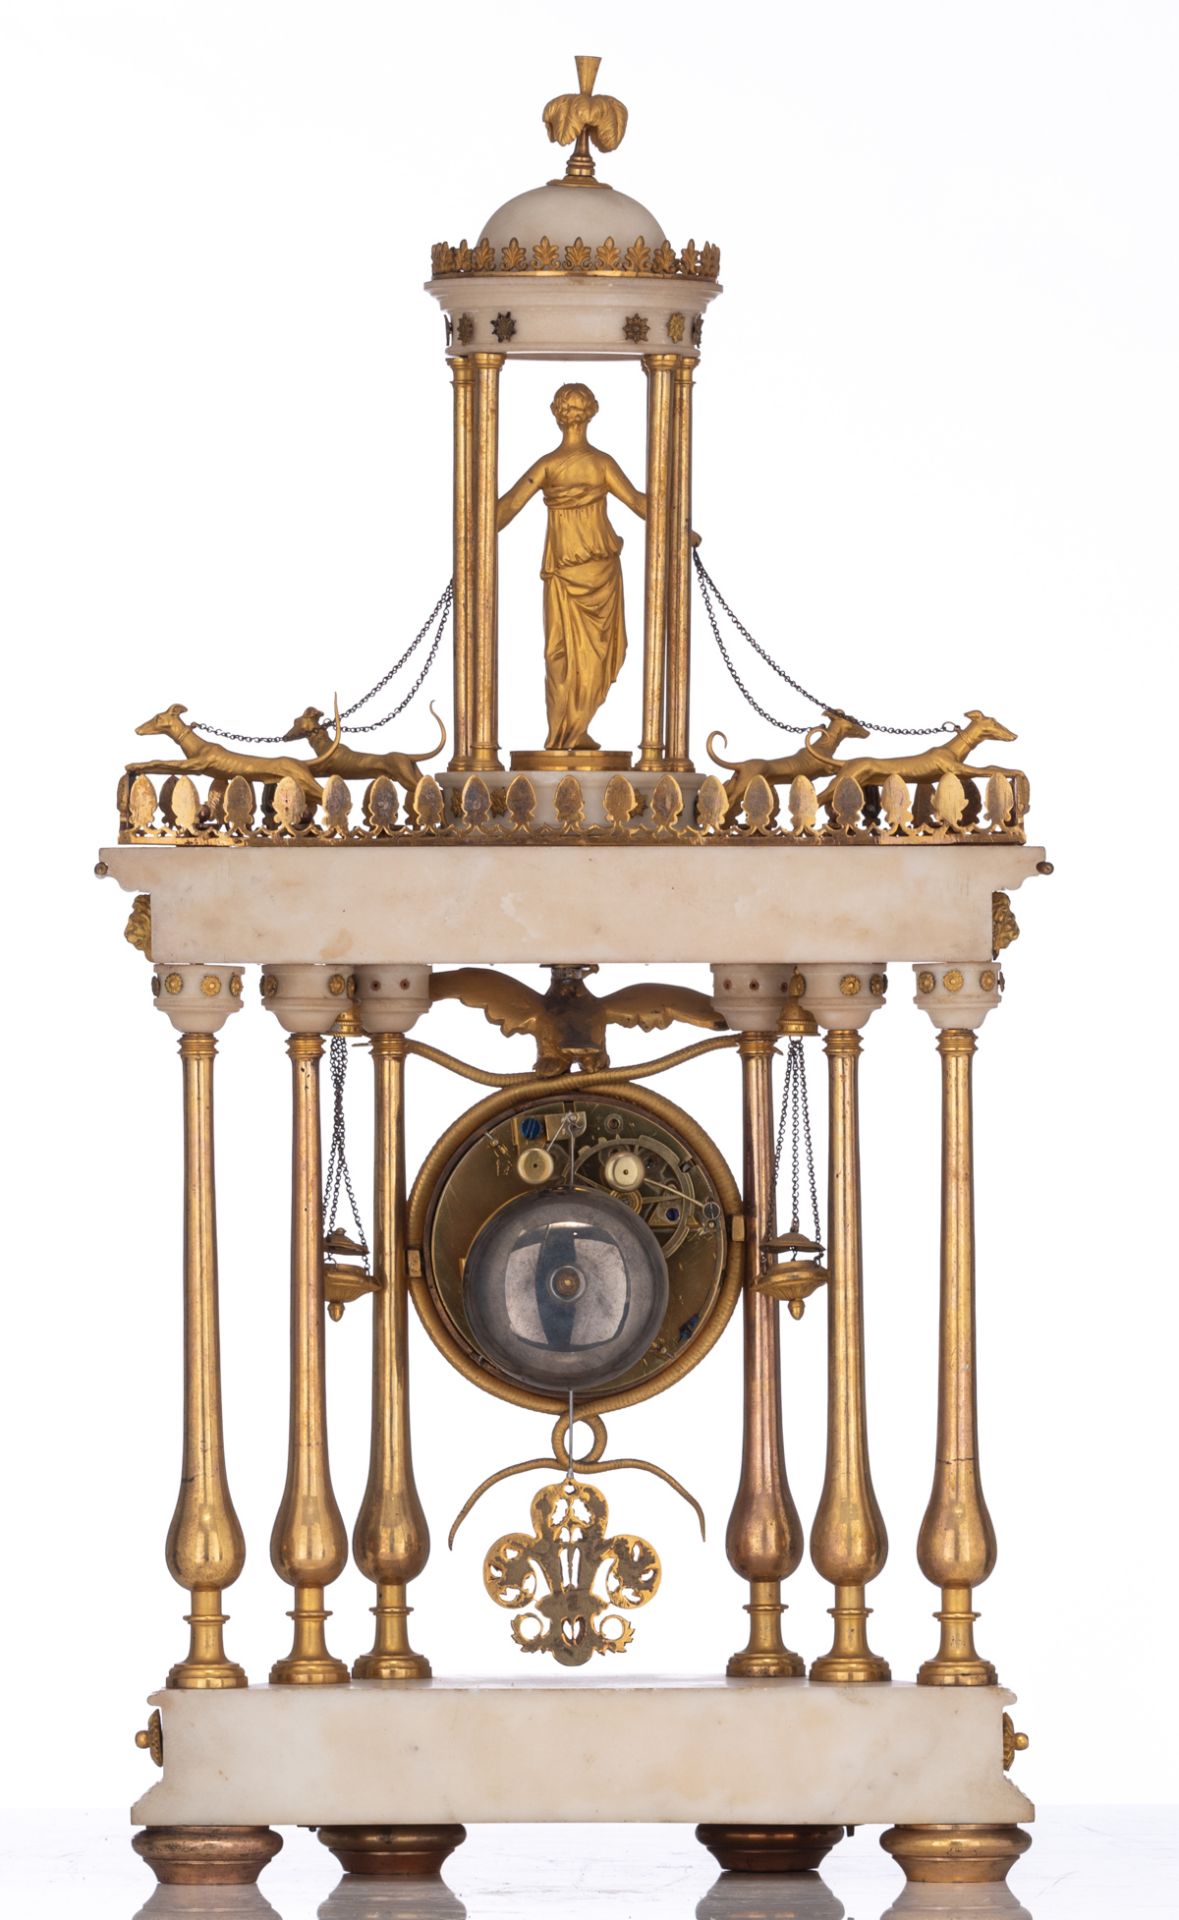 A fine Carrara marble and gilt bronze Louis XVI portico clock, on top of the dial, an eagle is crush - Image 3 of 9